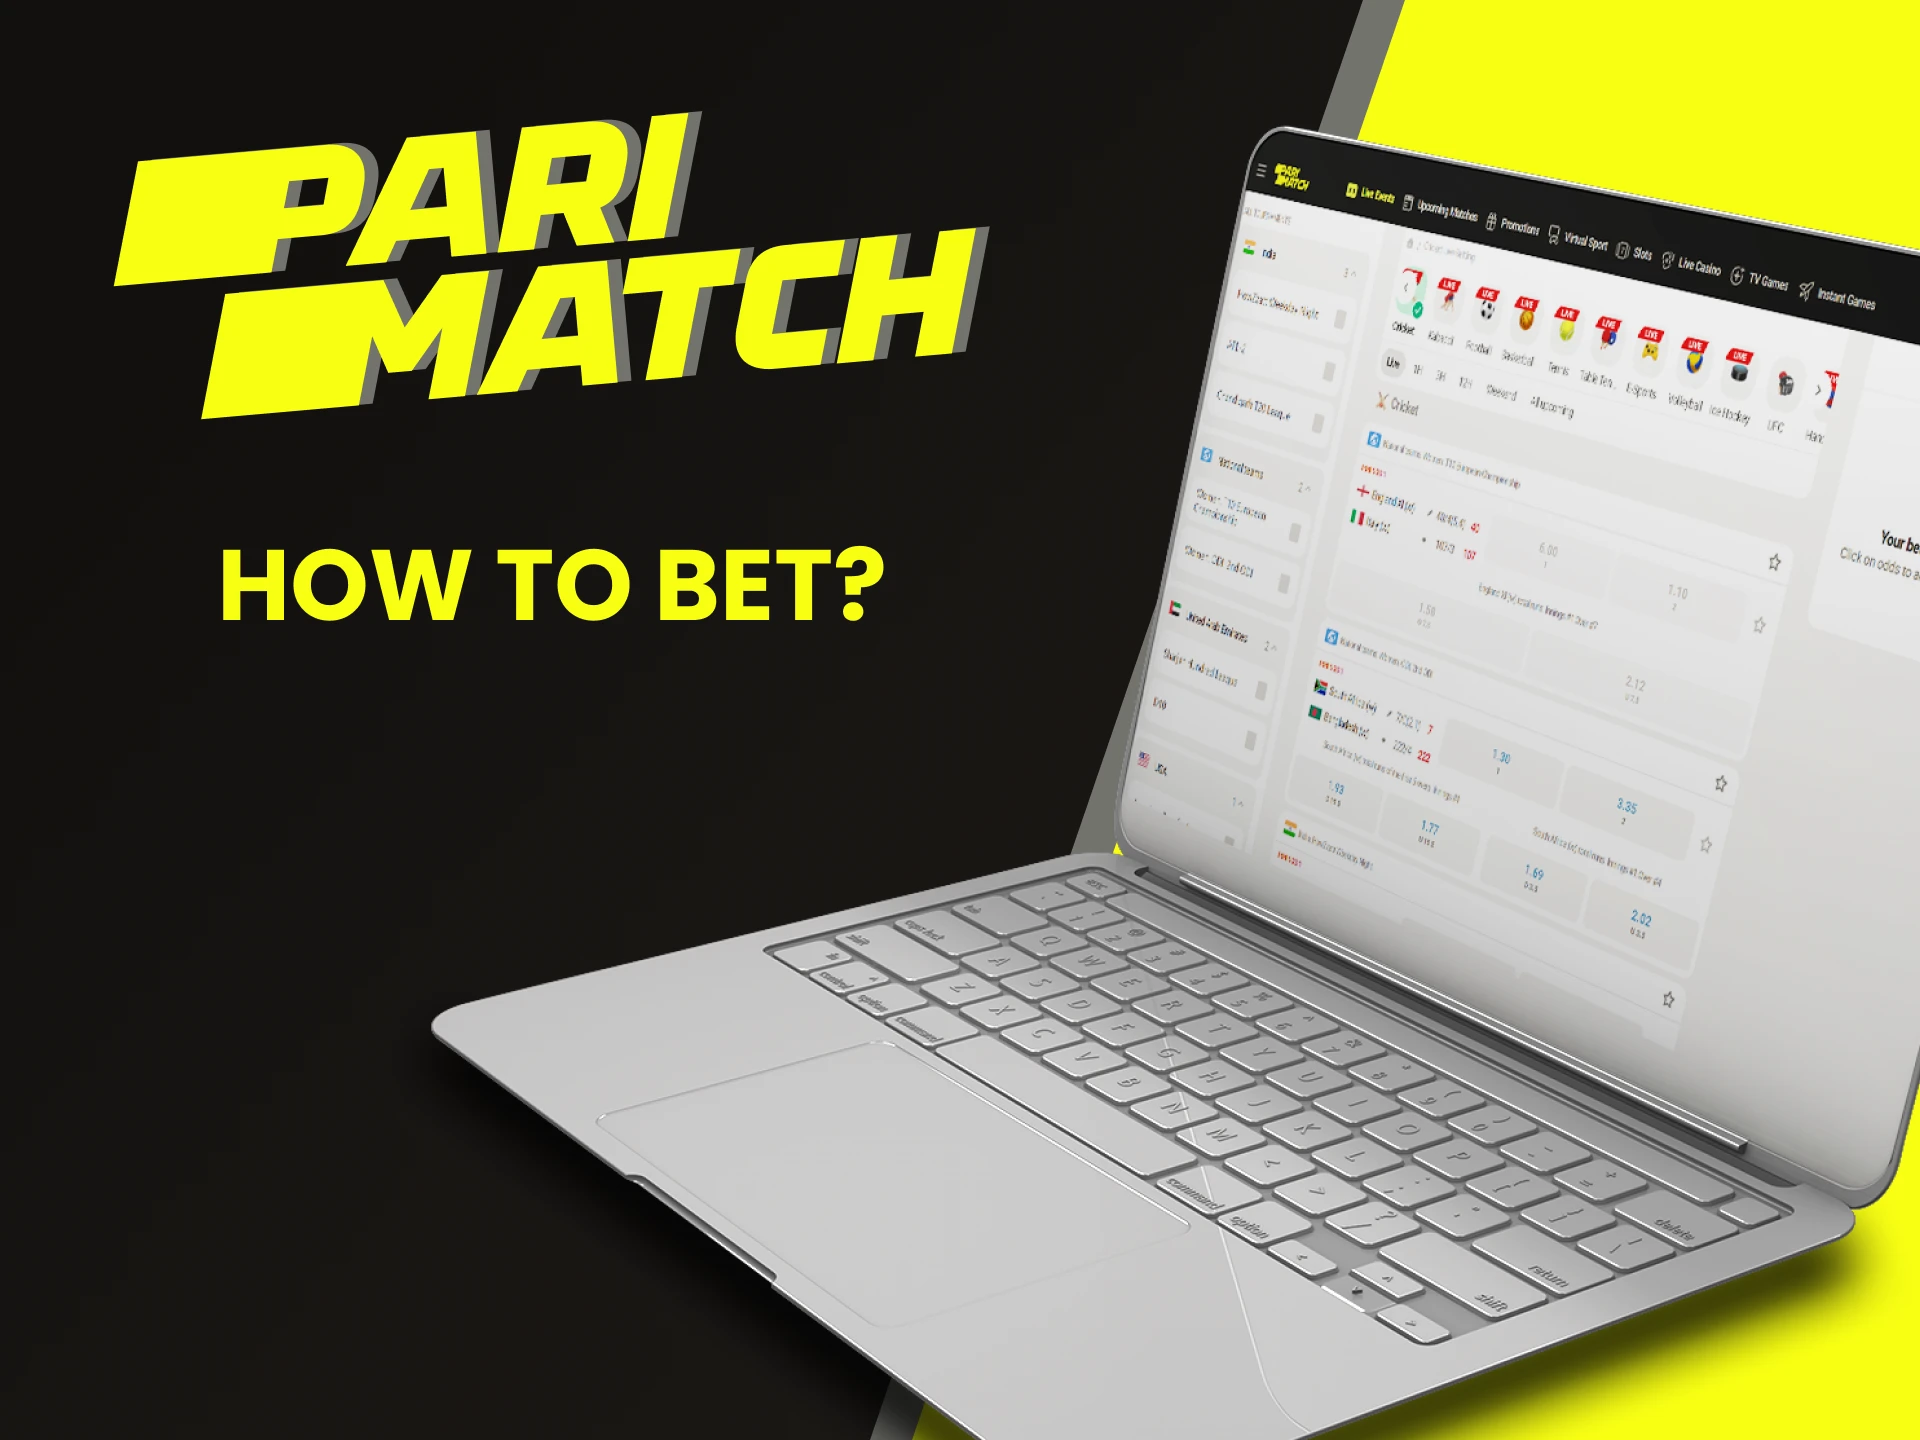 Find out how to bet on sports with Parimatch.